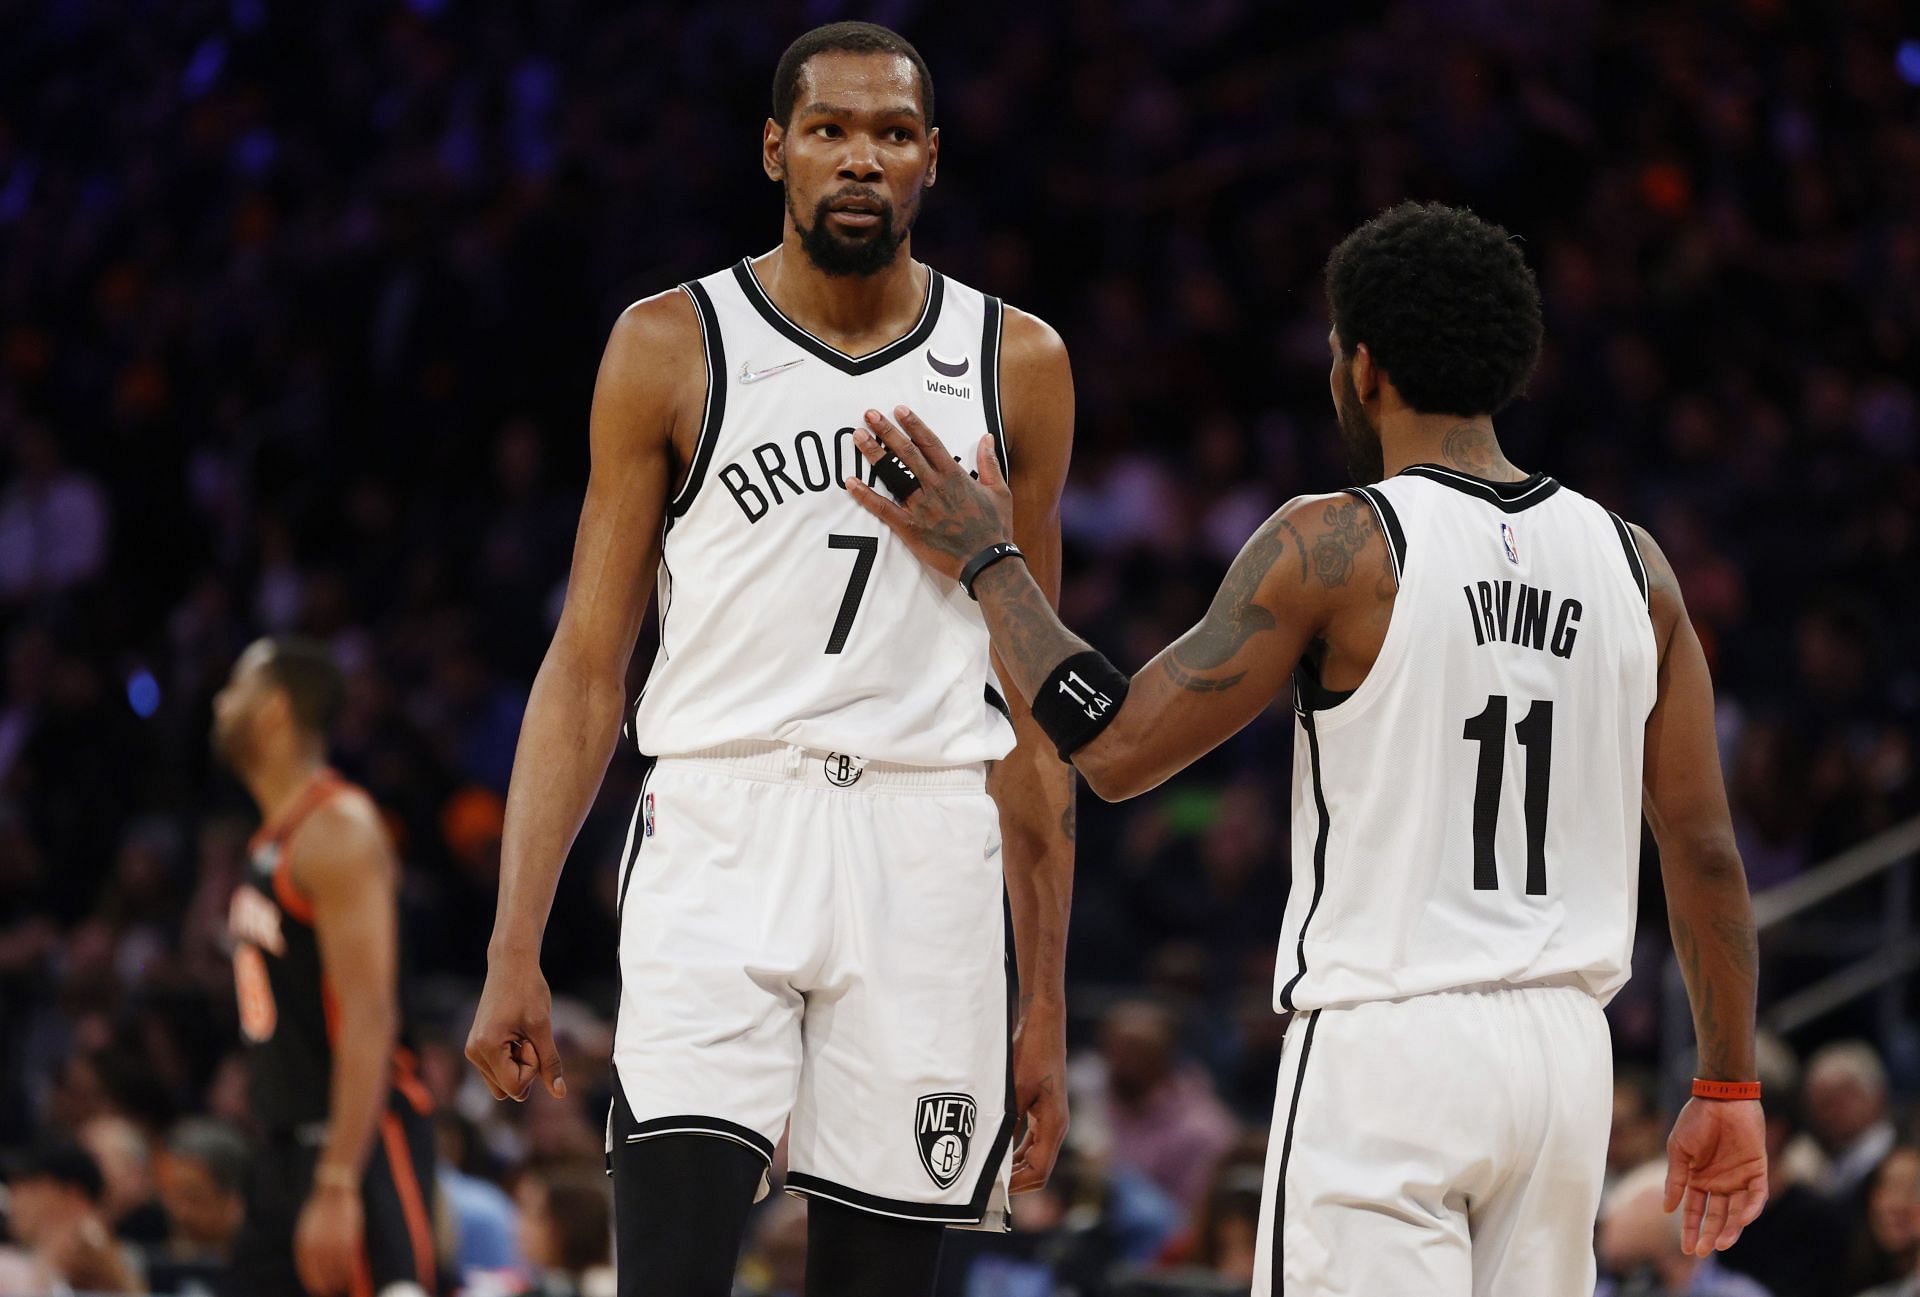 Kevin Durant and Kyrie Irving will be pivotal once again if the Brooklyn Nets are to defeat the Cavs